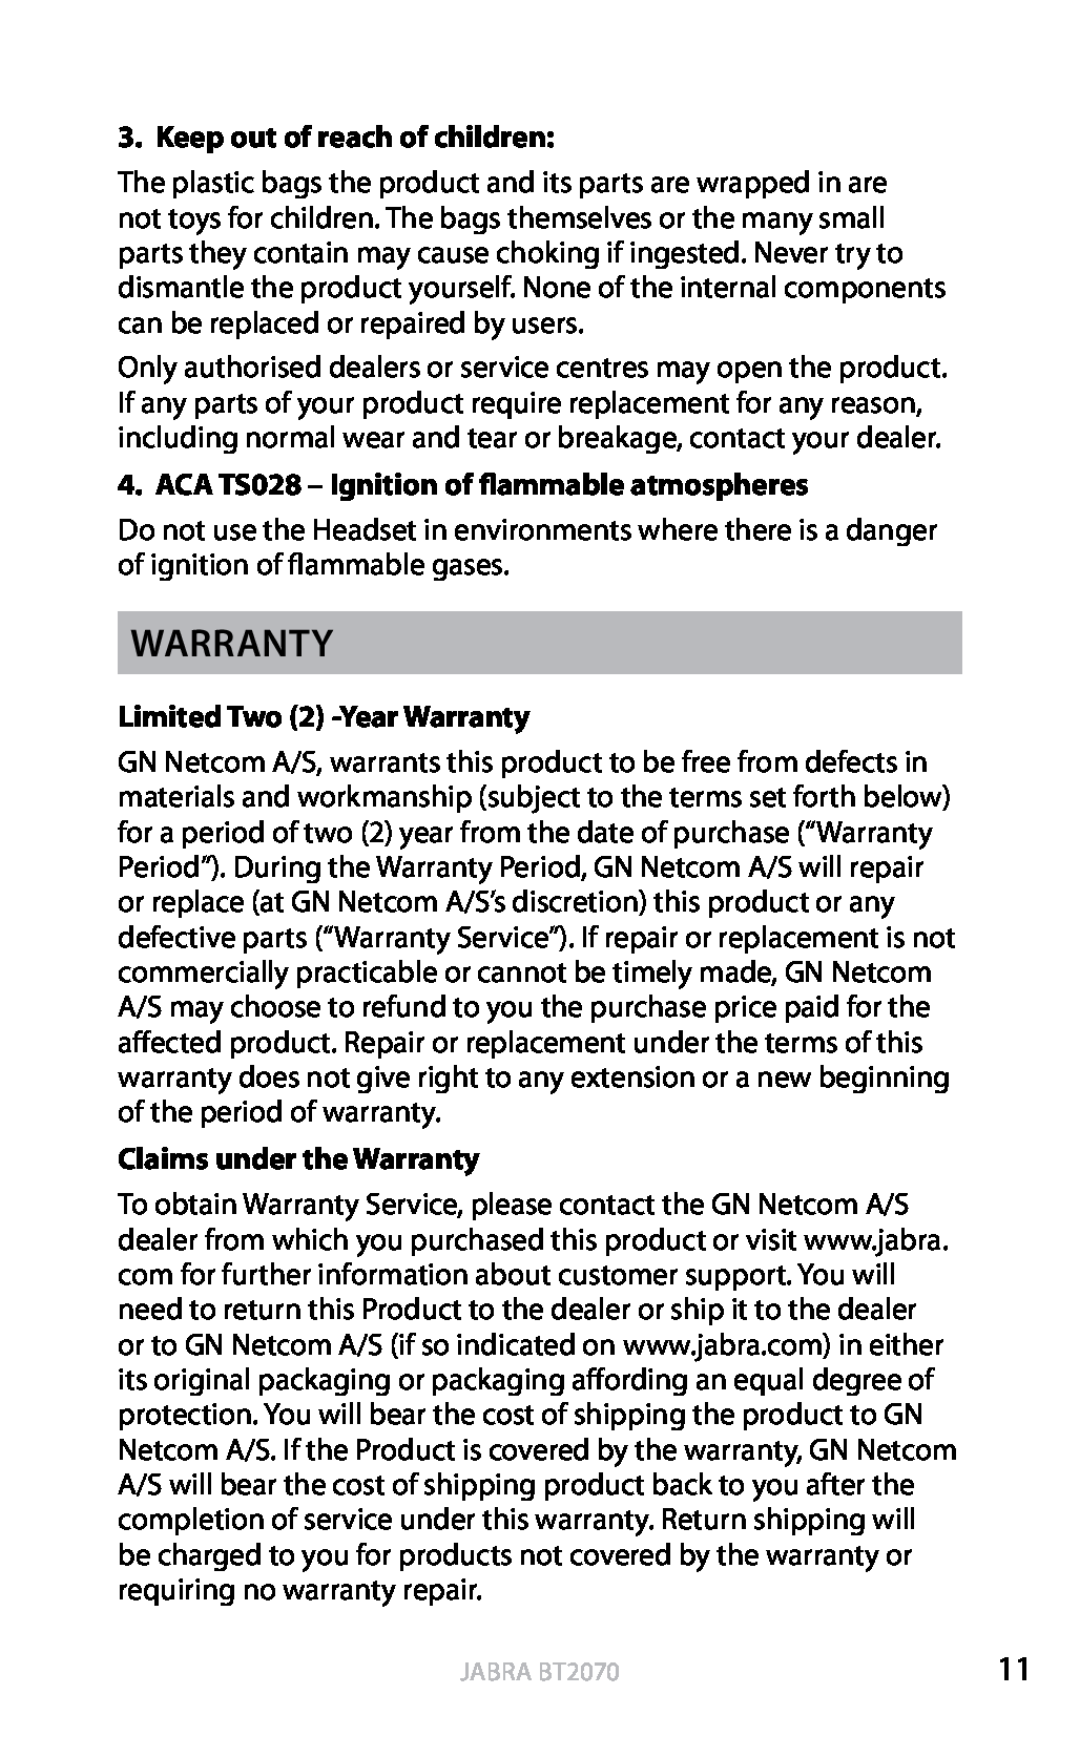 Jabra BT2070 user manual Warranty, Keep out of reach of children, ACA TS028 - Ignition of flammable atmospheres, english 